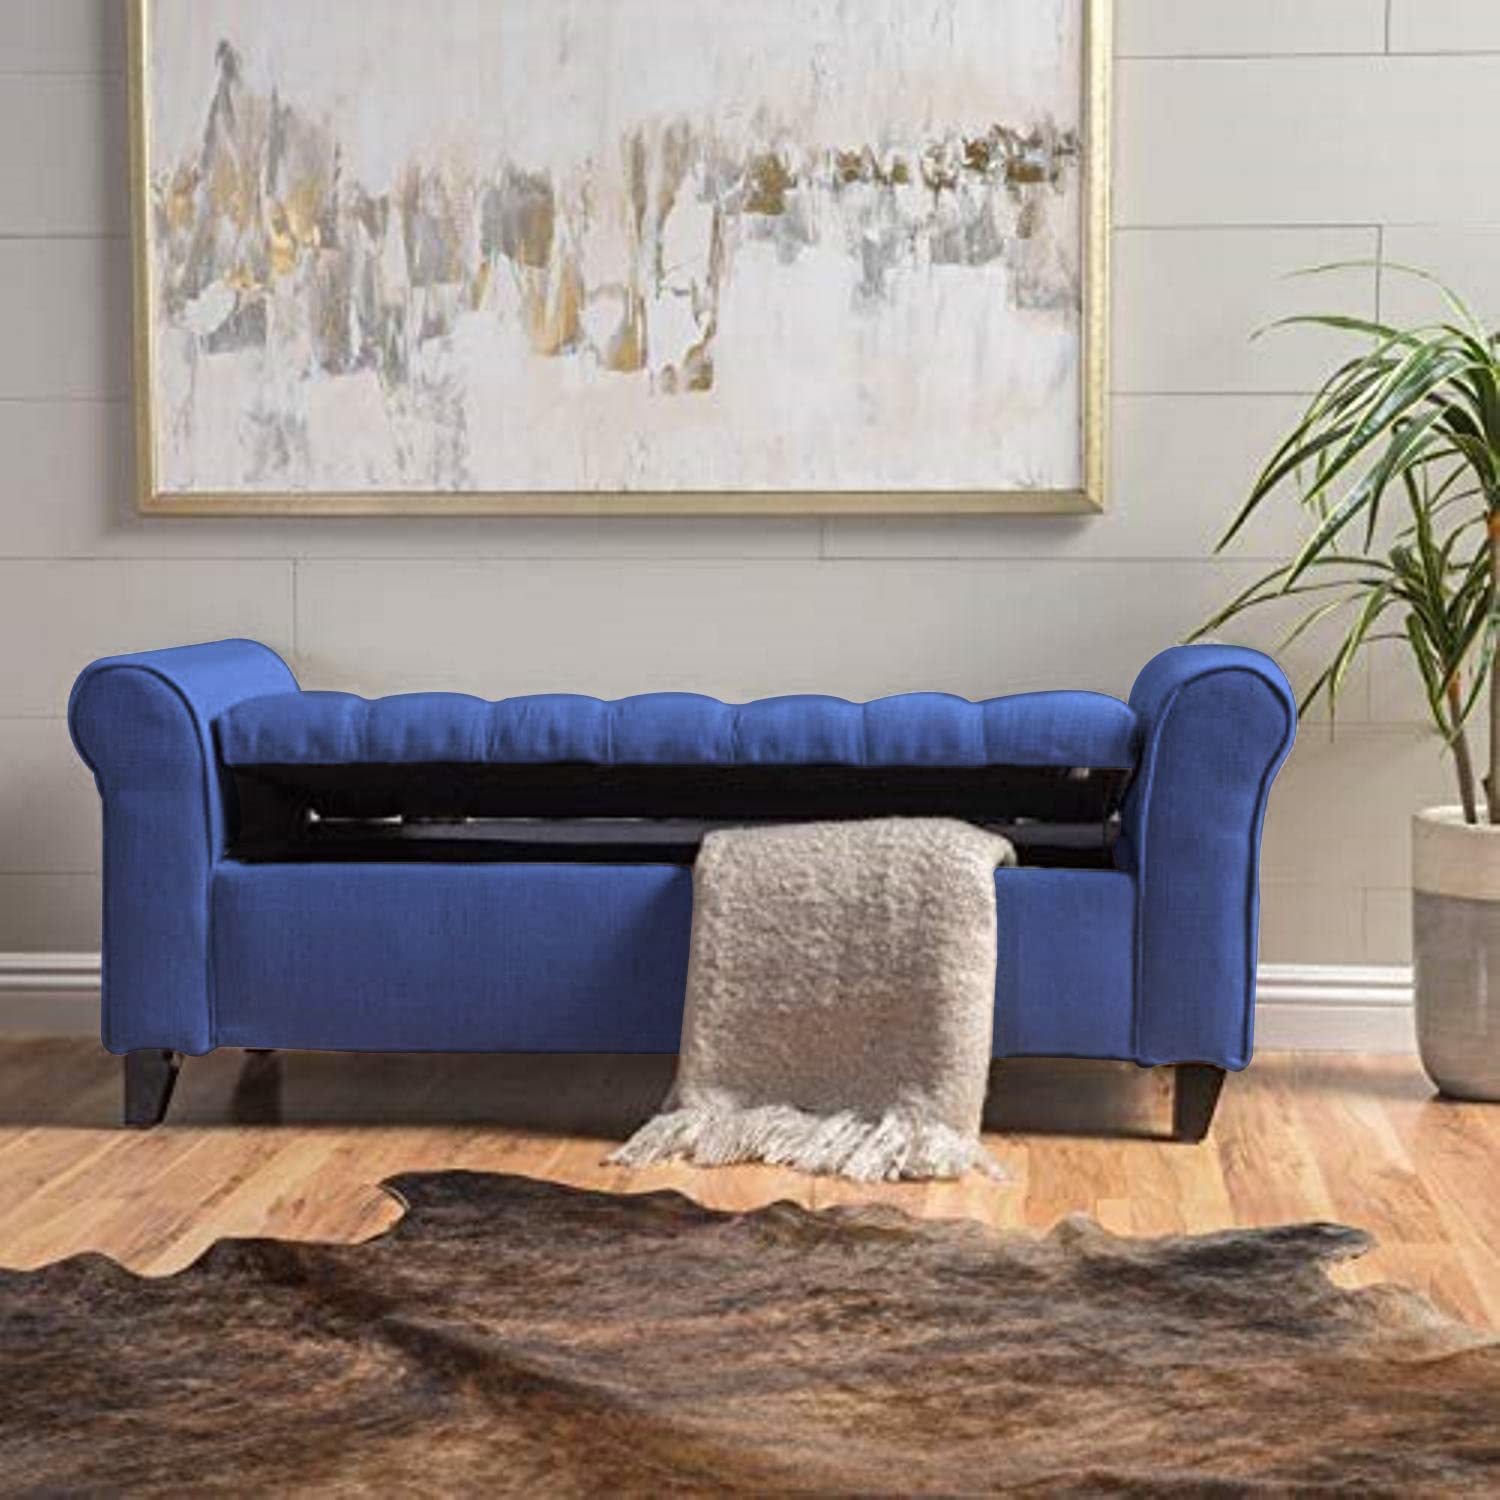 Toronto 2 Seater Fabric Storage Ottoman Bench Sette Pouffe Puffy for Foot Rest - Torque India